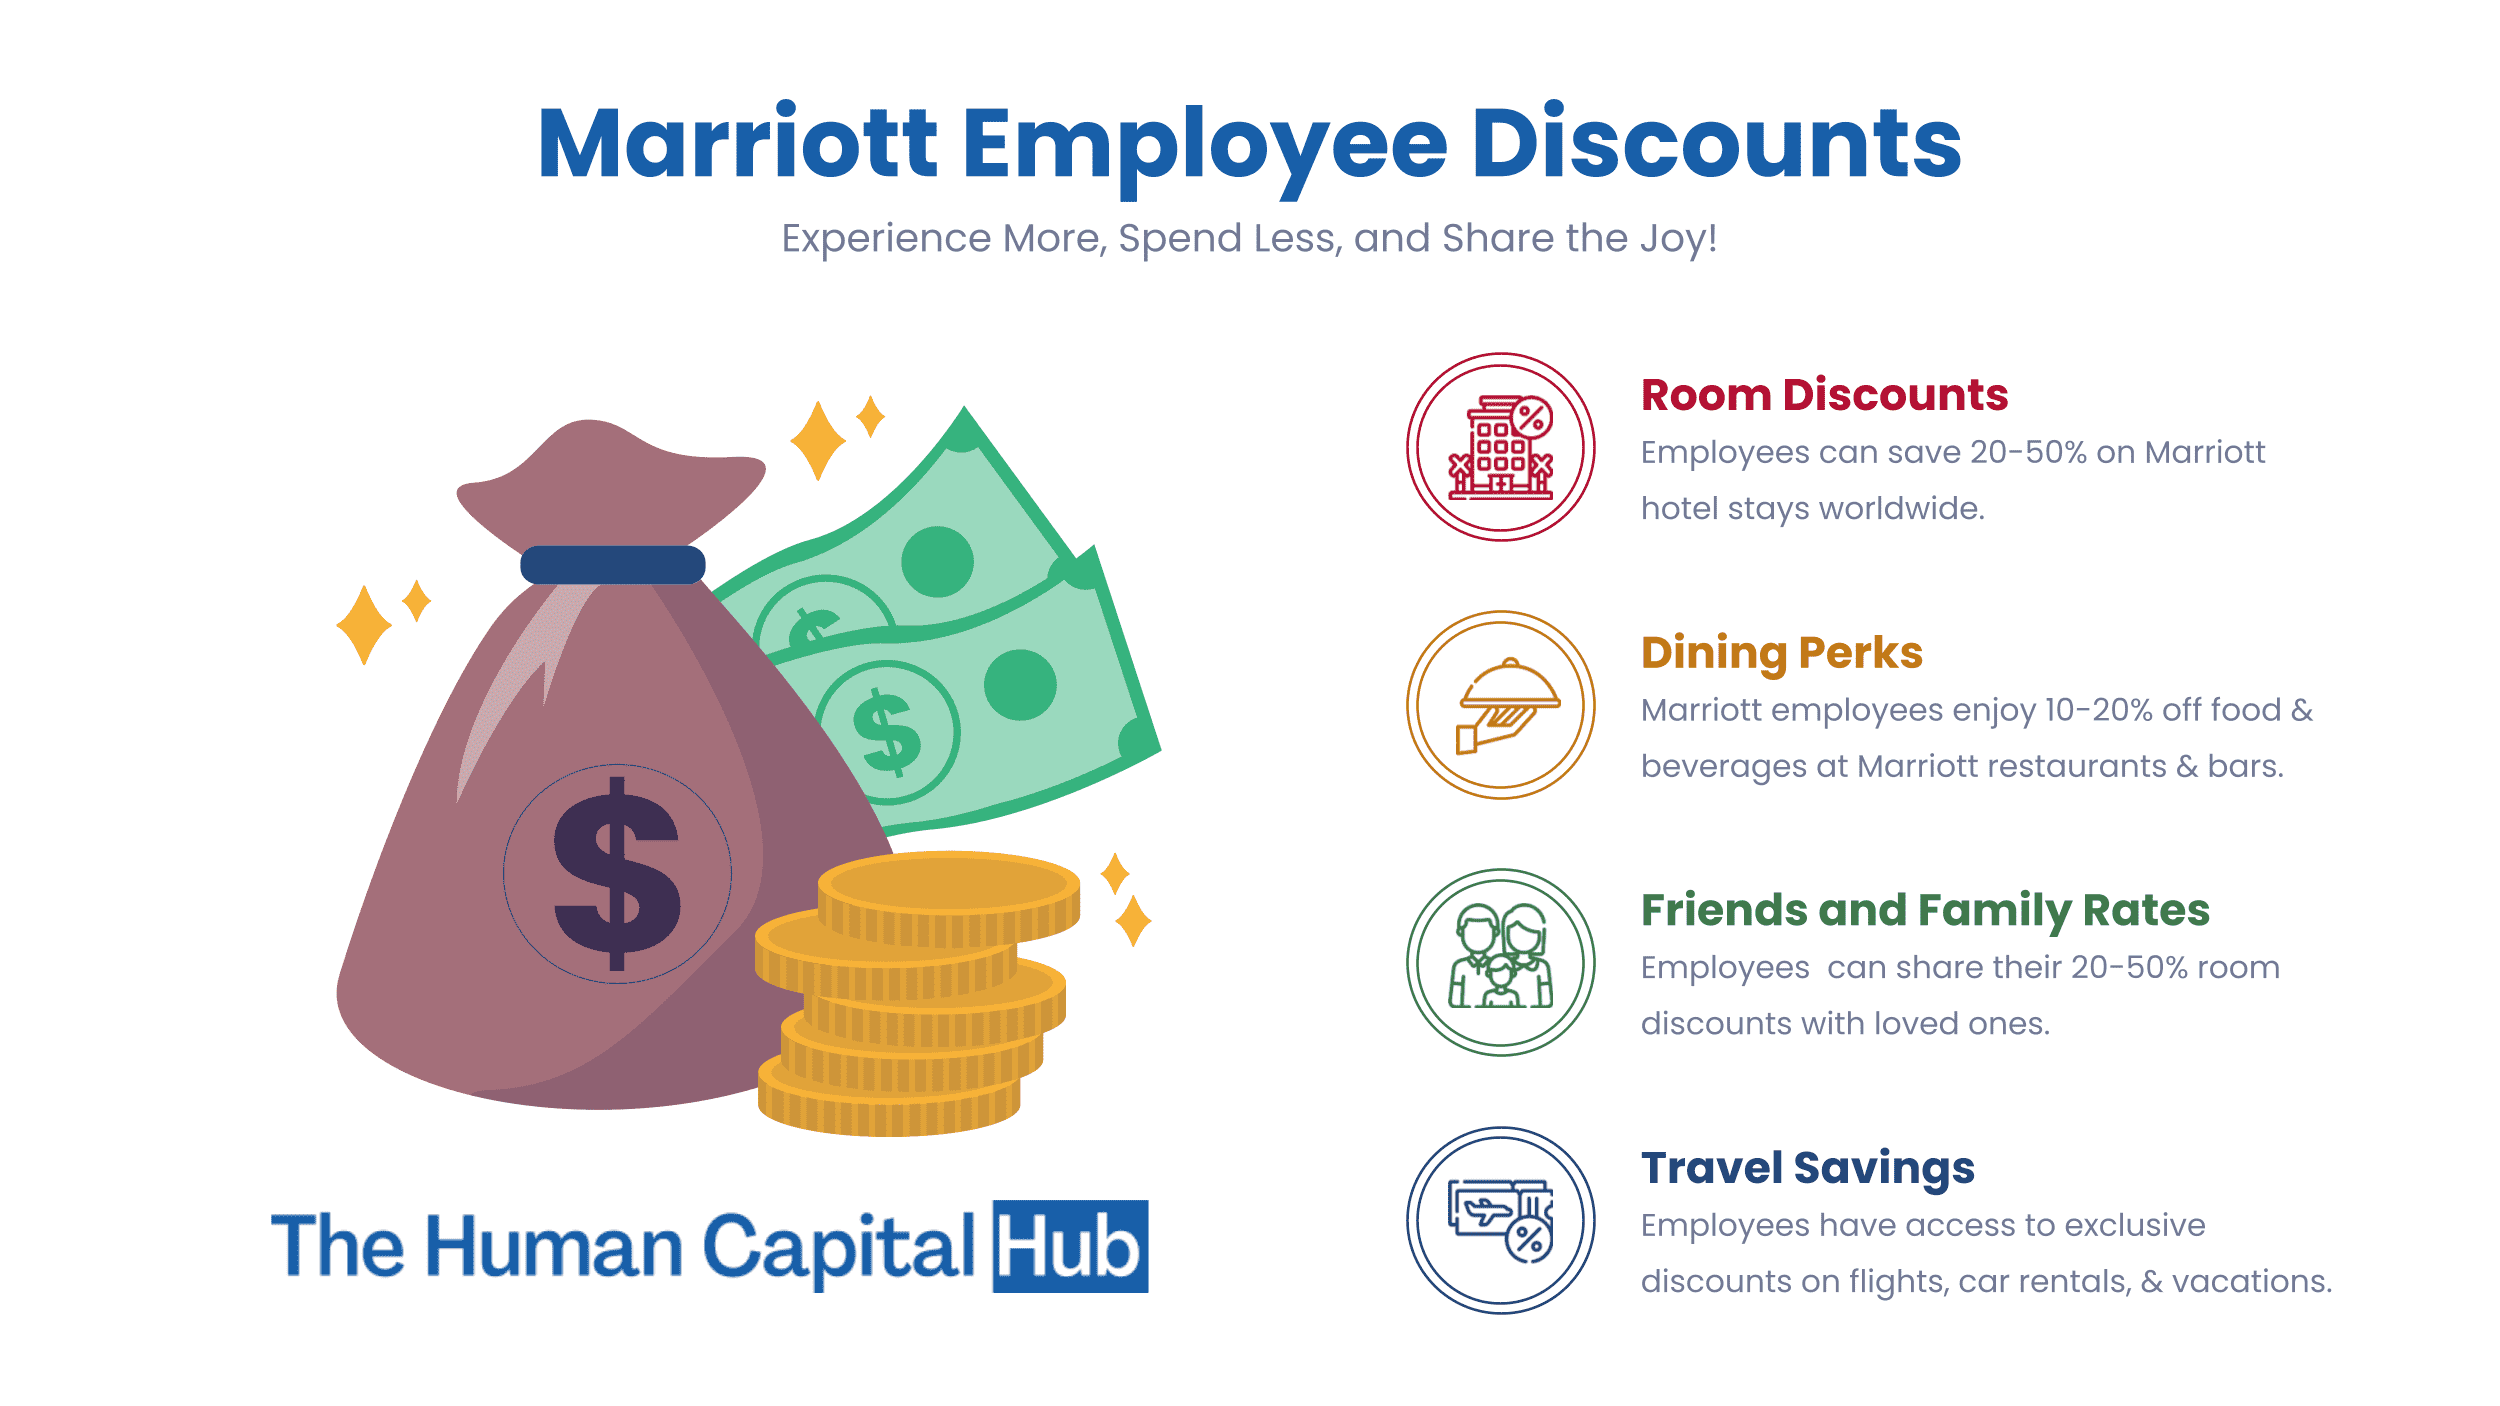 Marriott Employee Discounts Everything you Need to Know